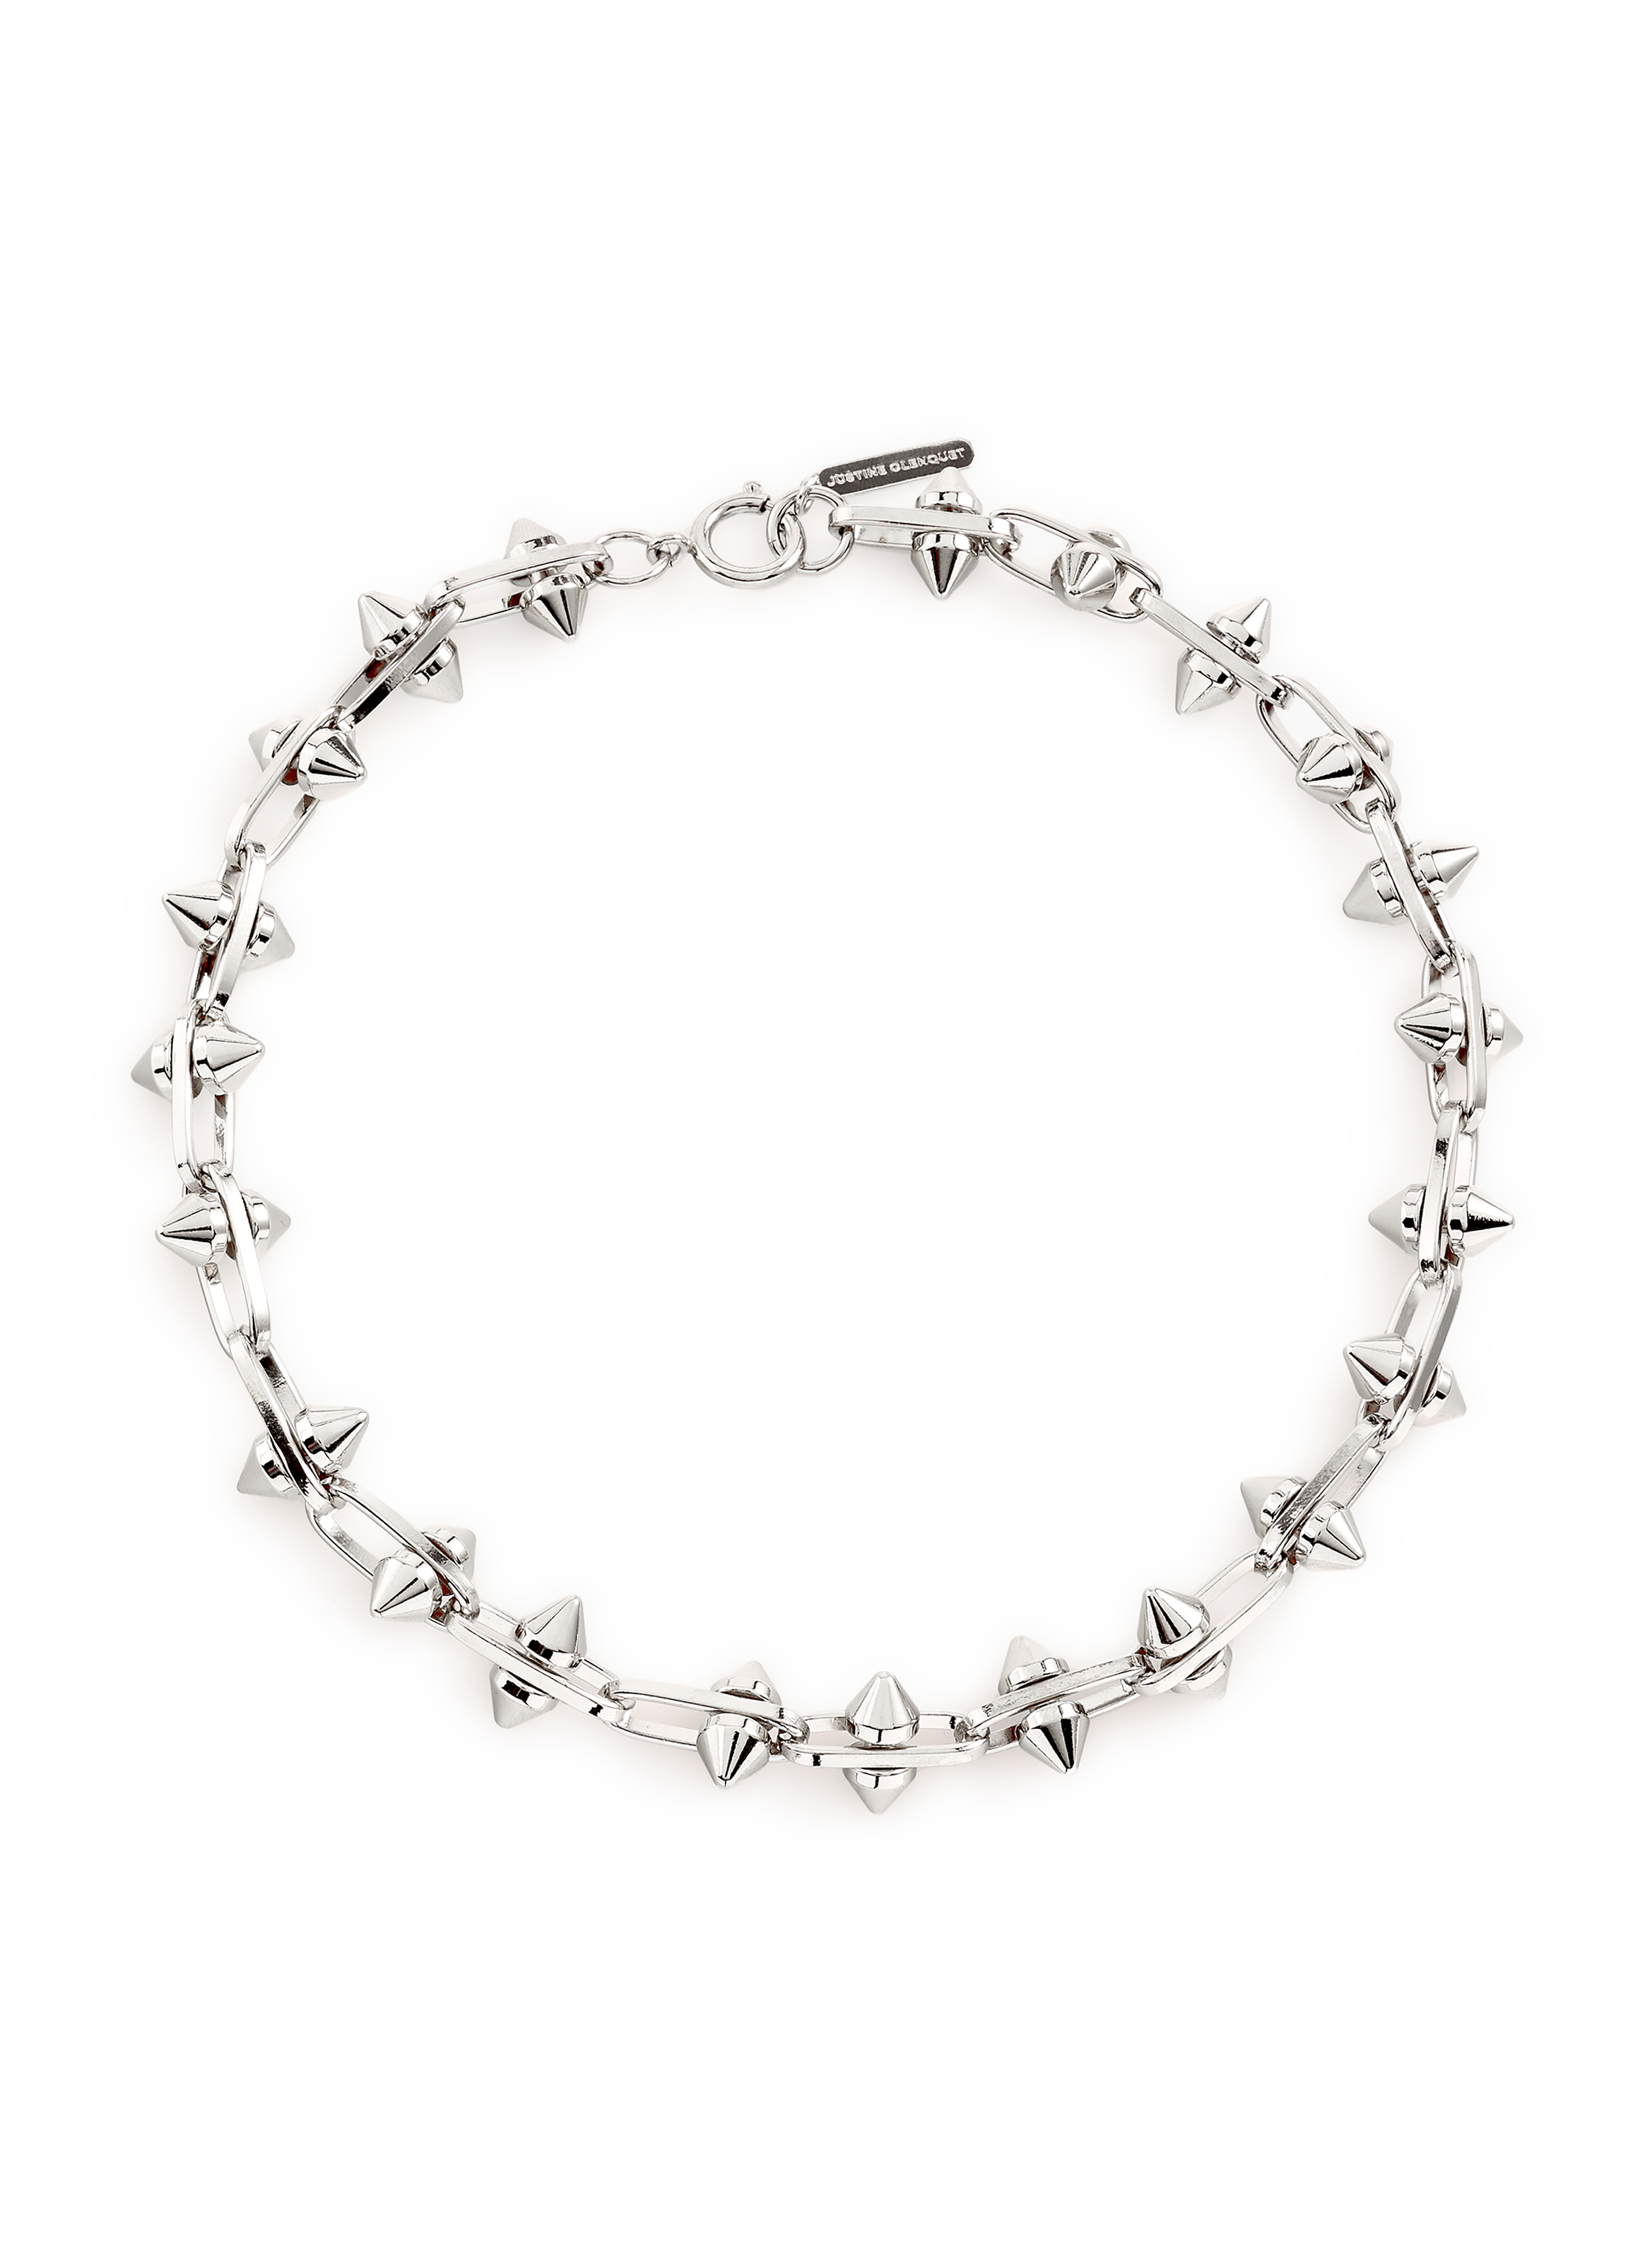 CHARLY CHOKER NECKLACE - JUSTINE CLENQUET for WOMEN | Printemps.com